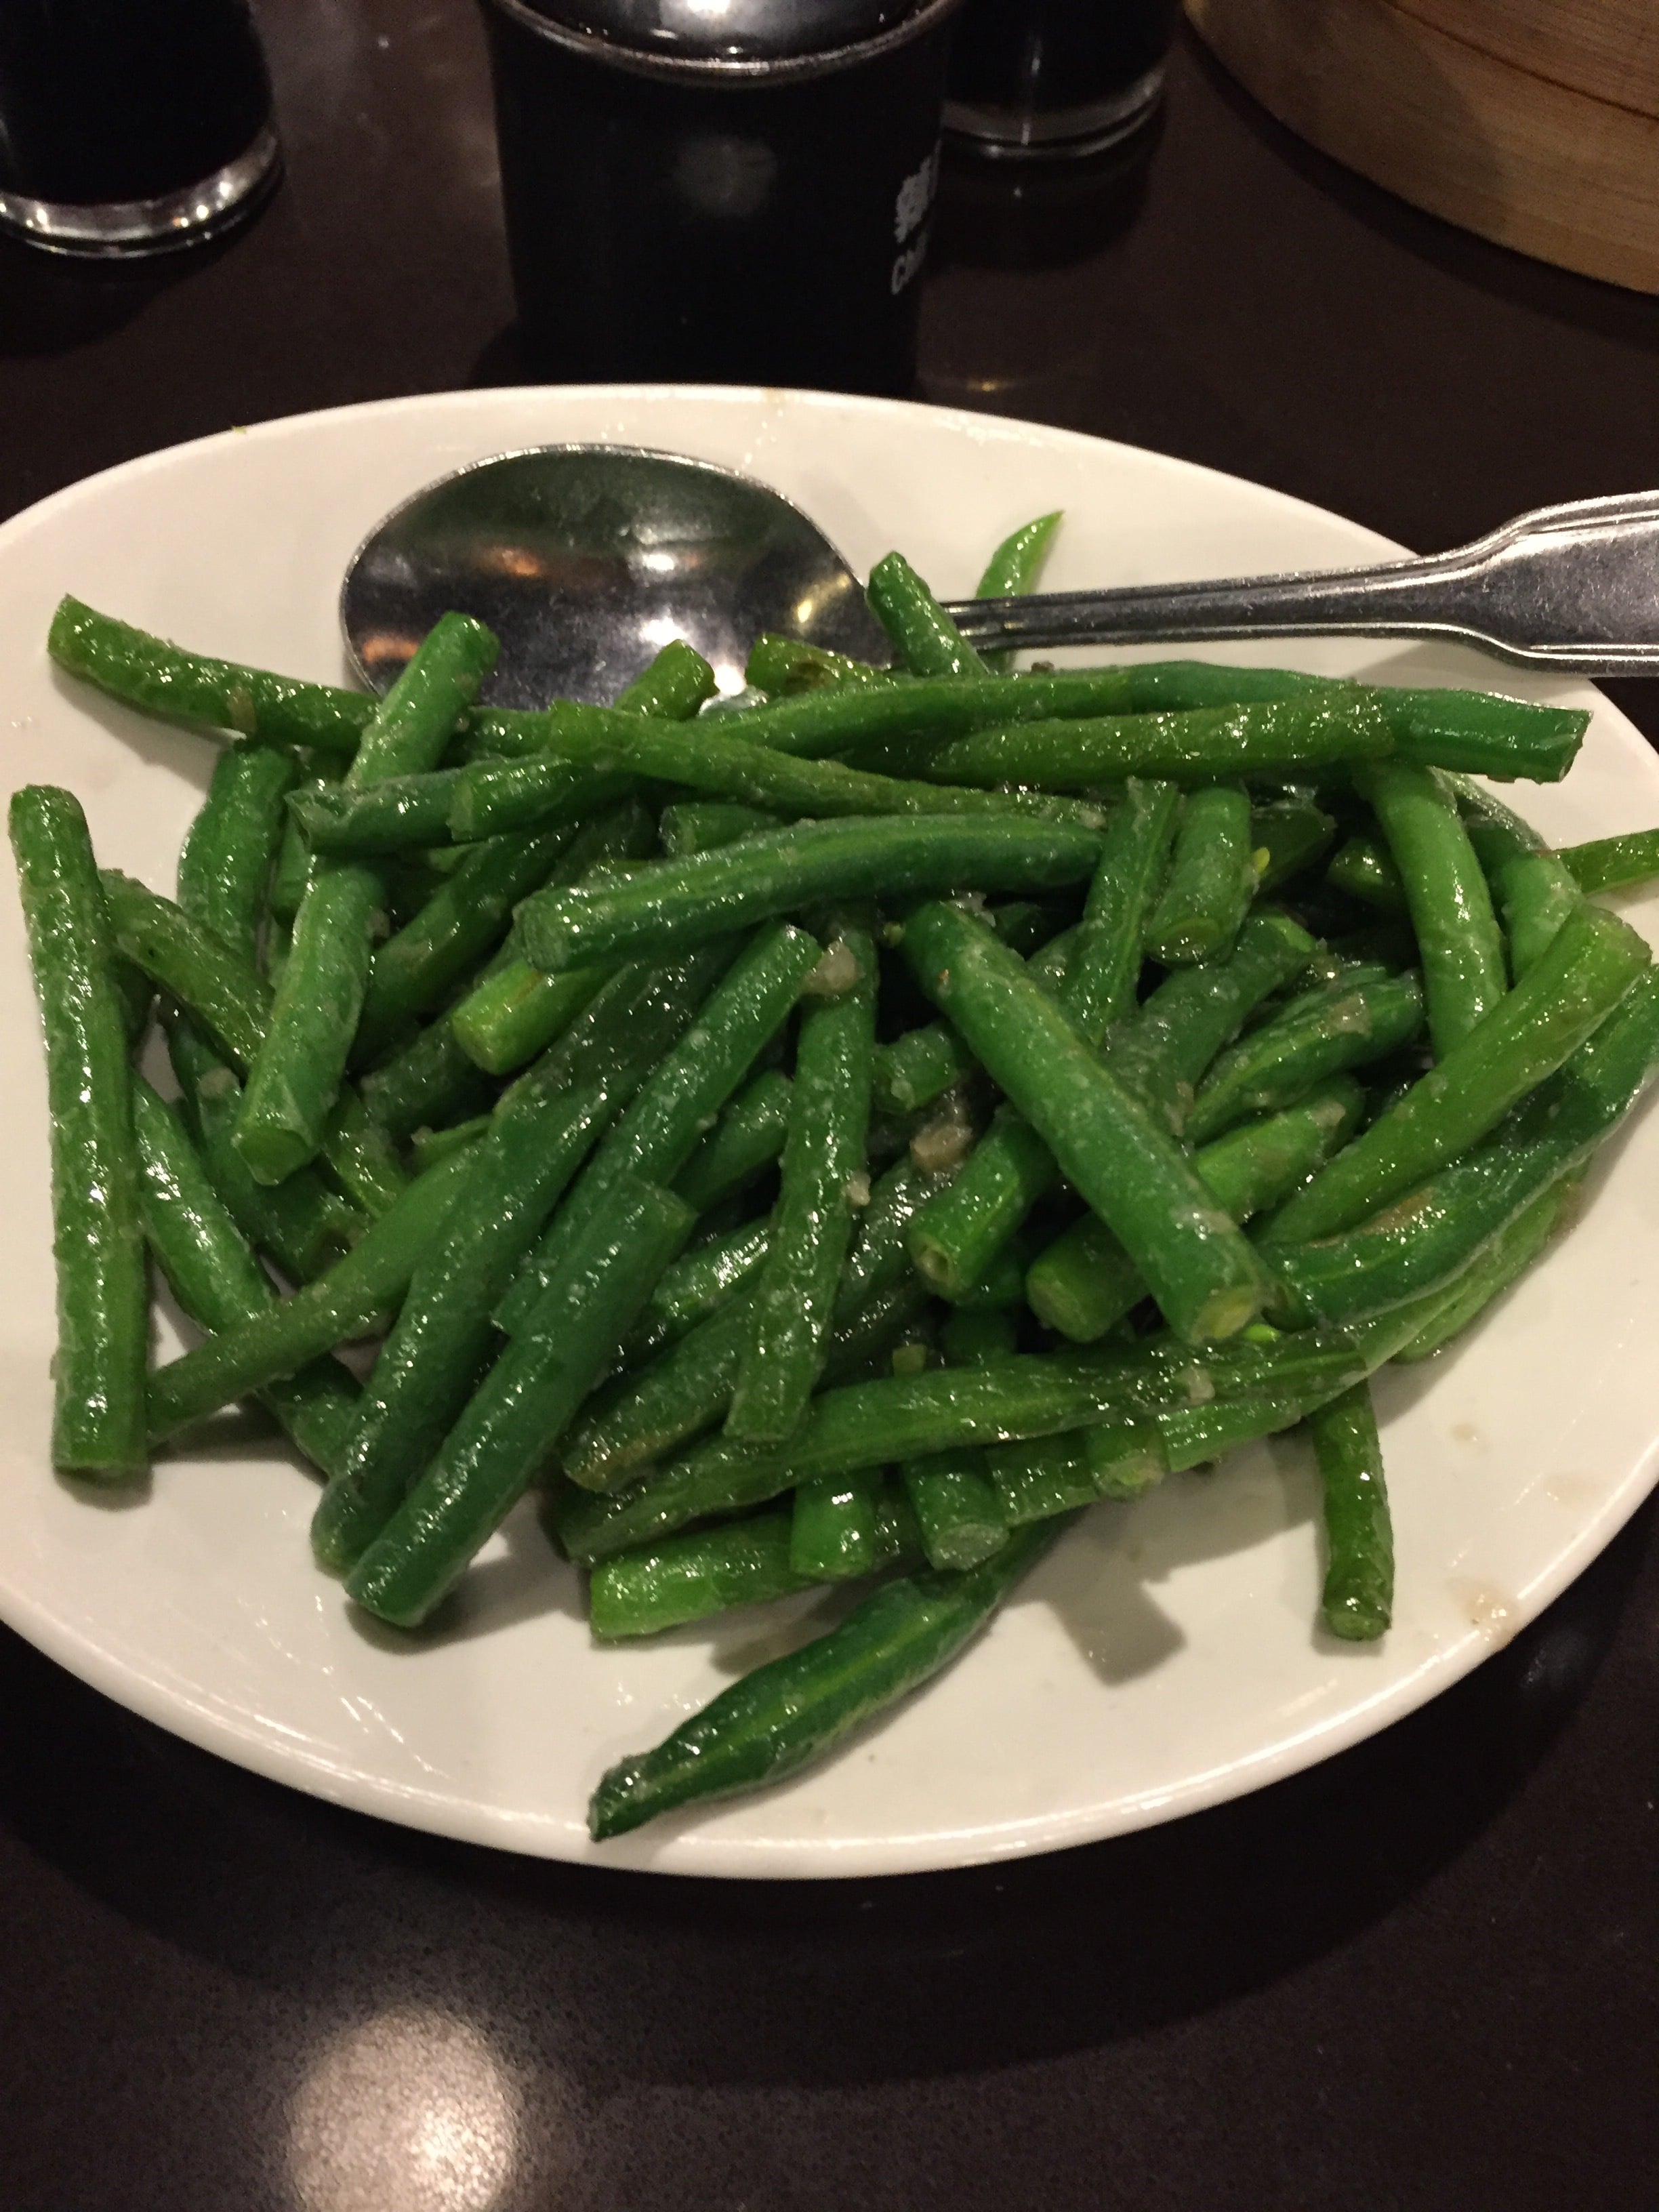 Sauteed String Beans with Garlic